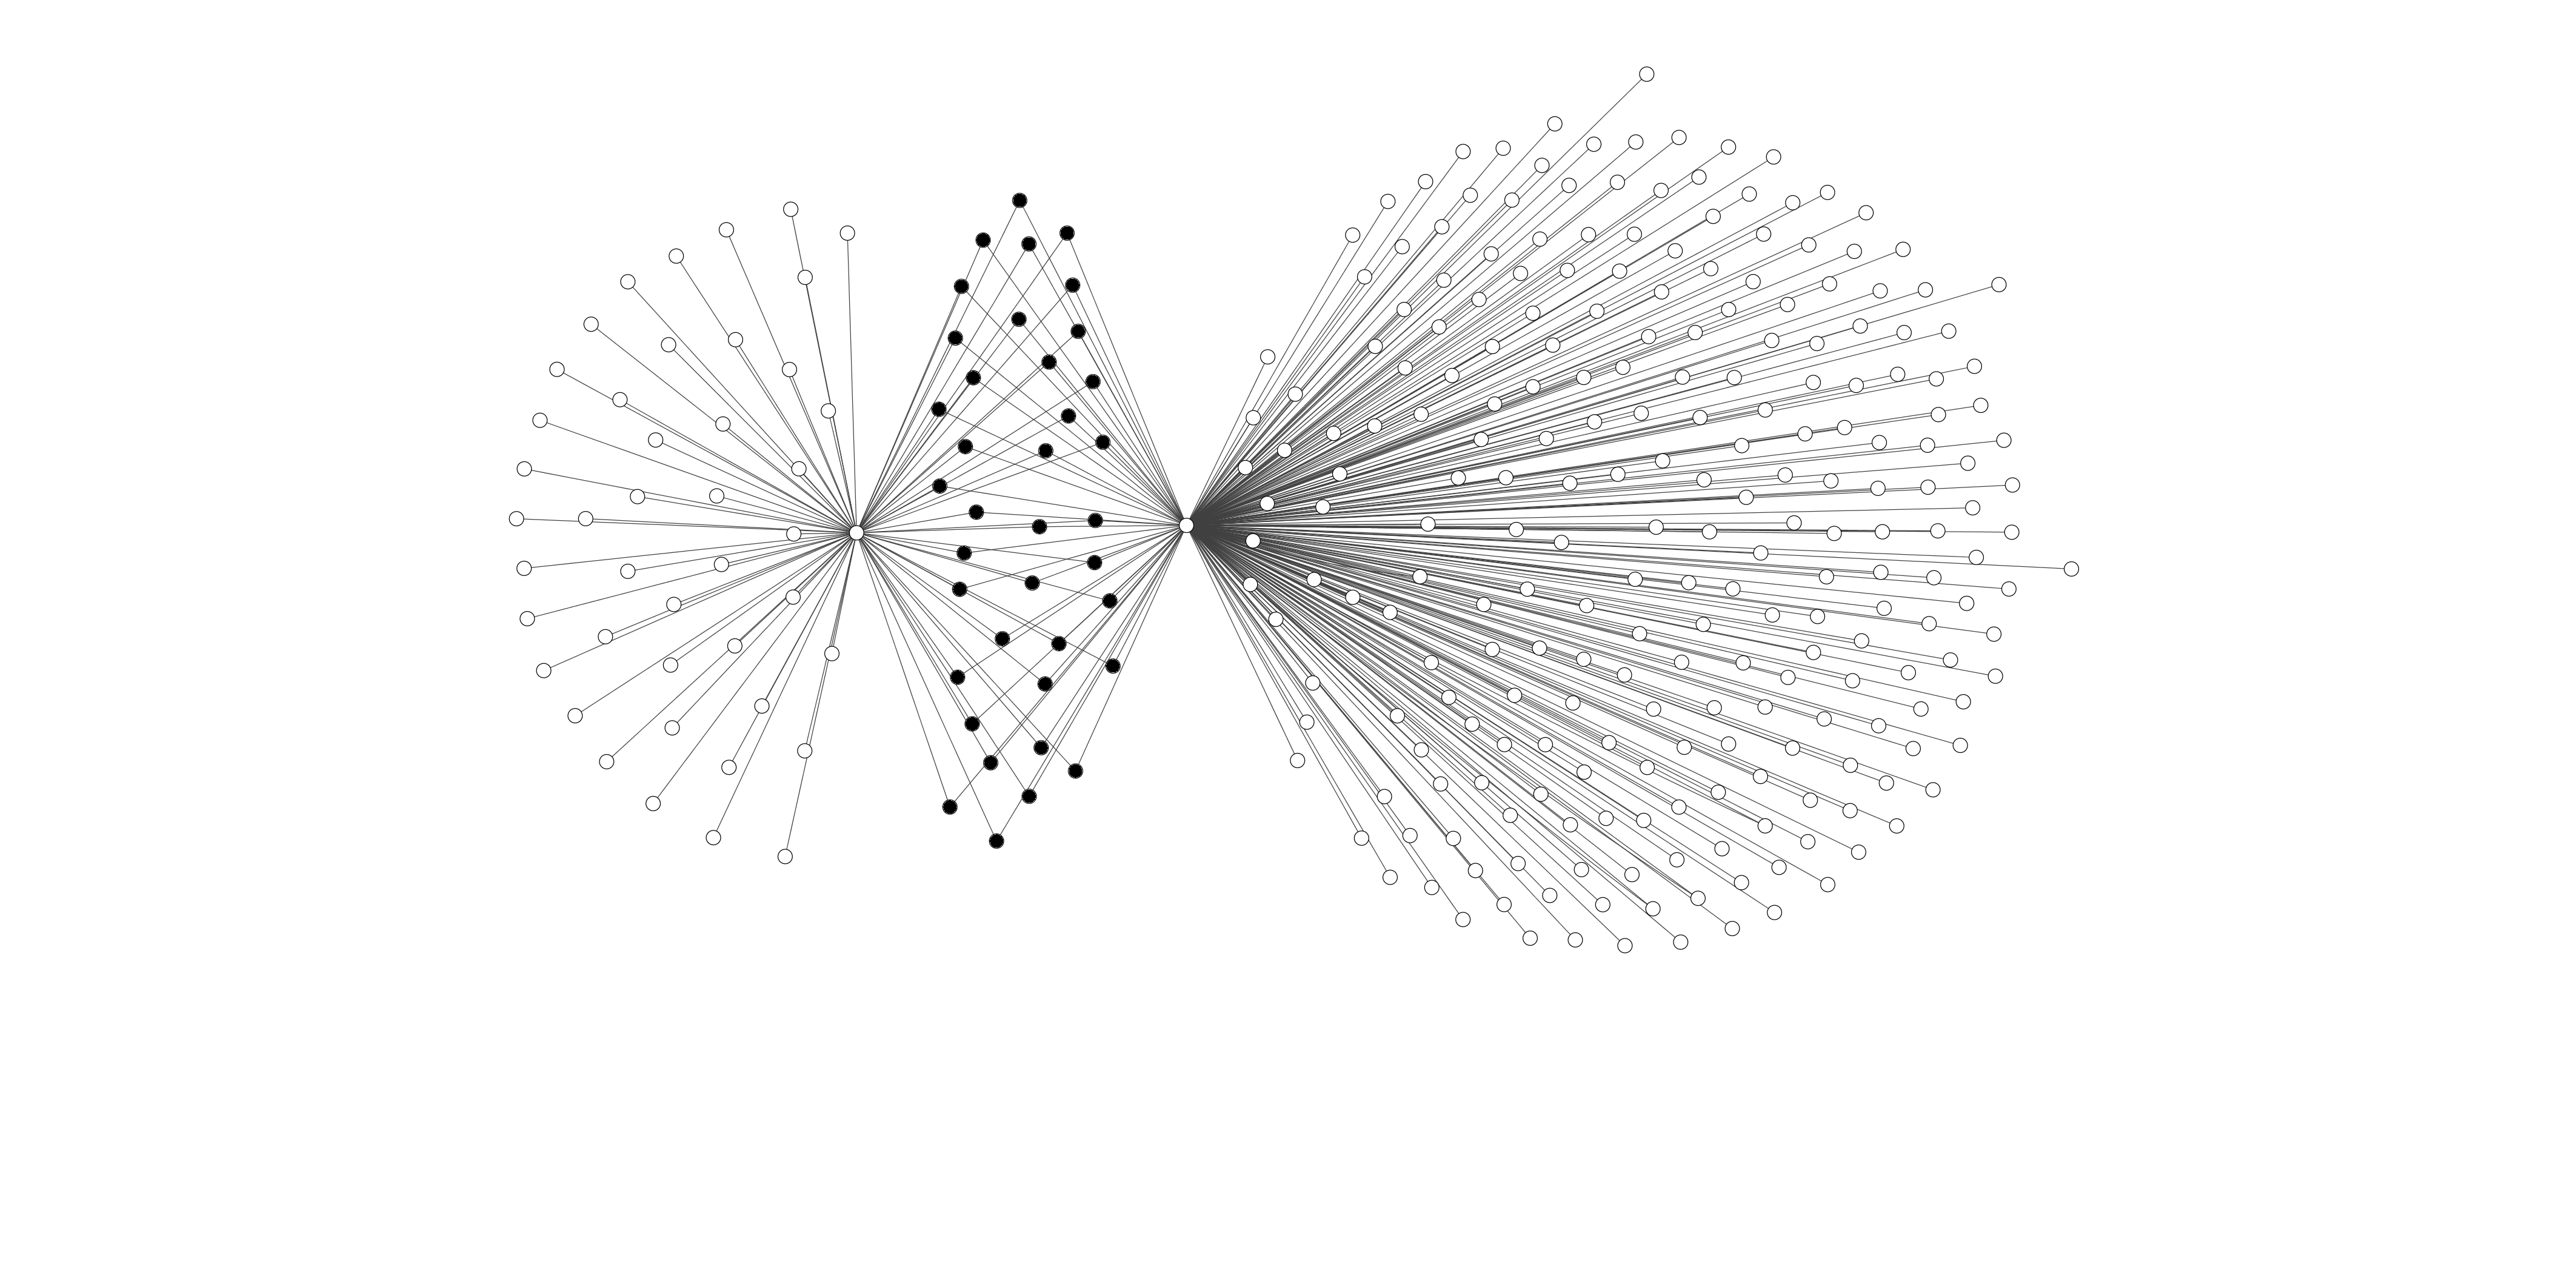 Bimodal Network Graph Pointing to the Shared Authors , Represented by the Black Nodes between the Two Journals Sintaksis and Kontinent